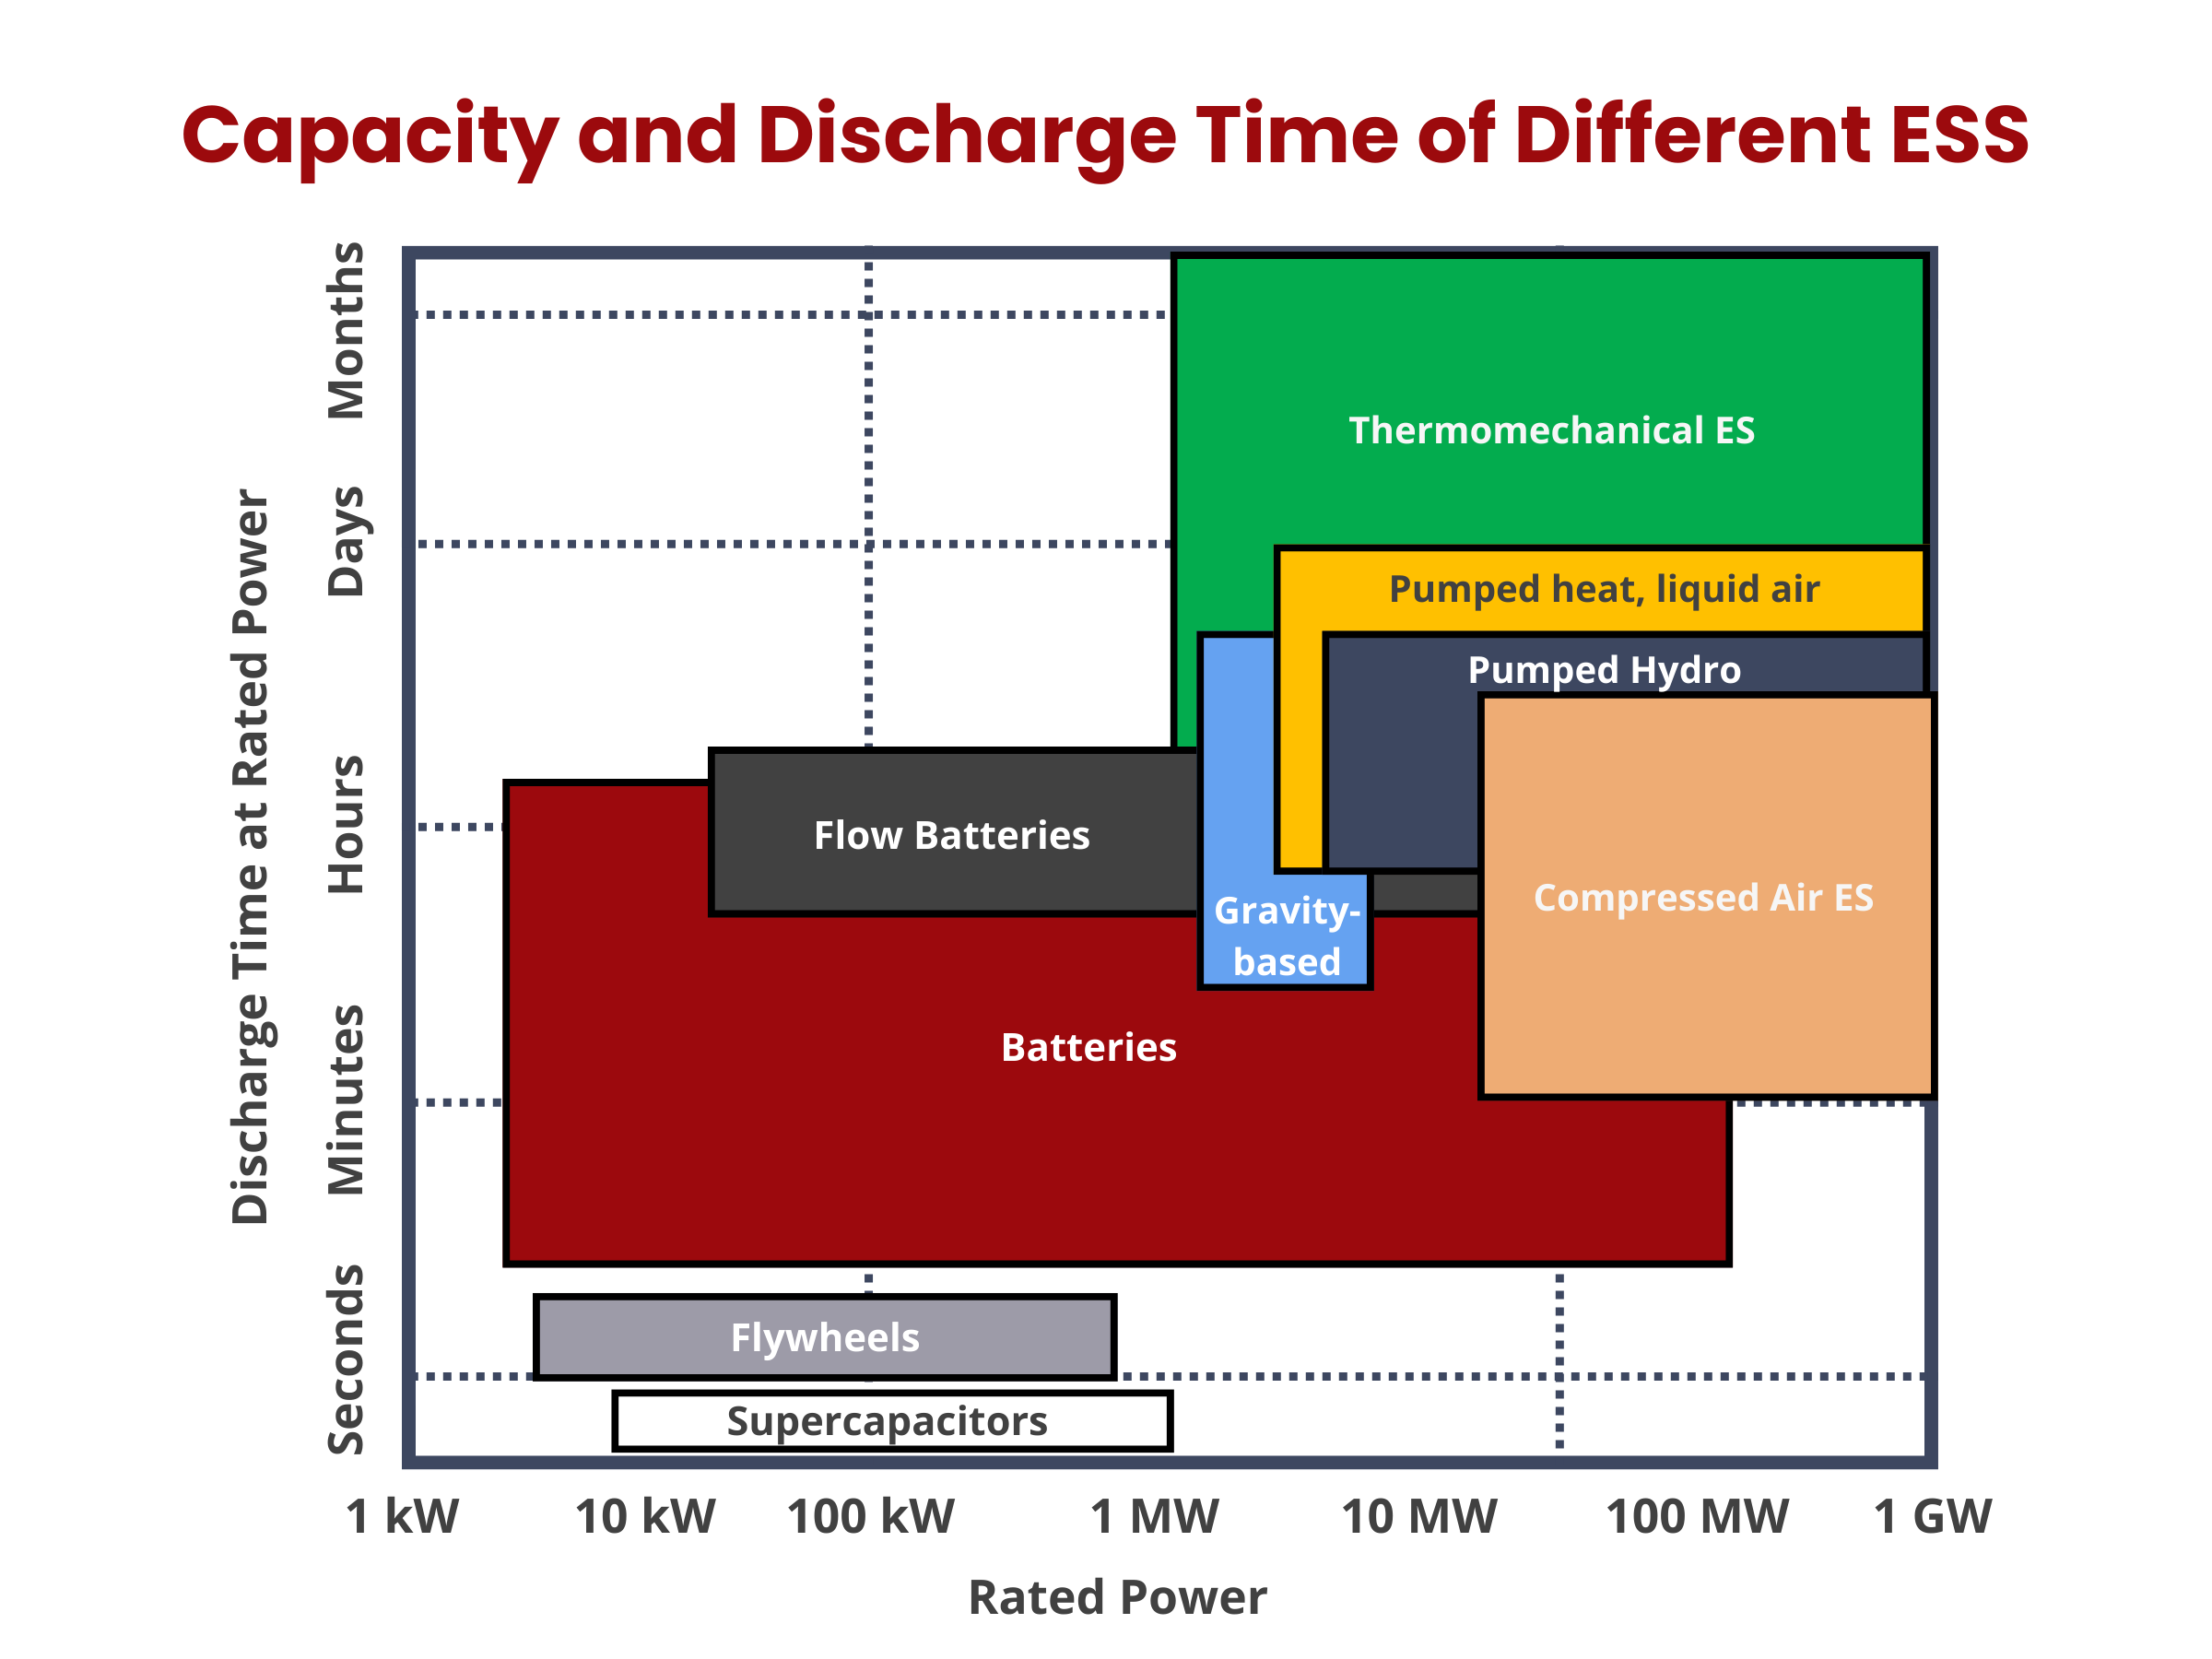 Capacity and Discharge Time of Different Energy Storage Systems